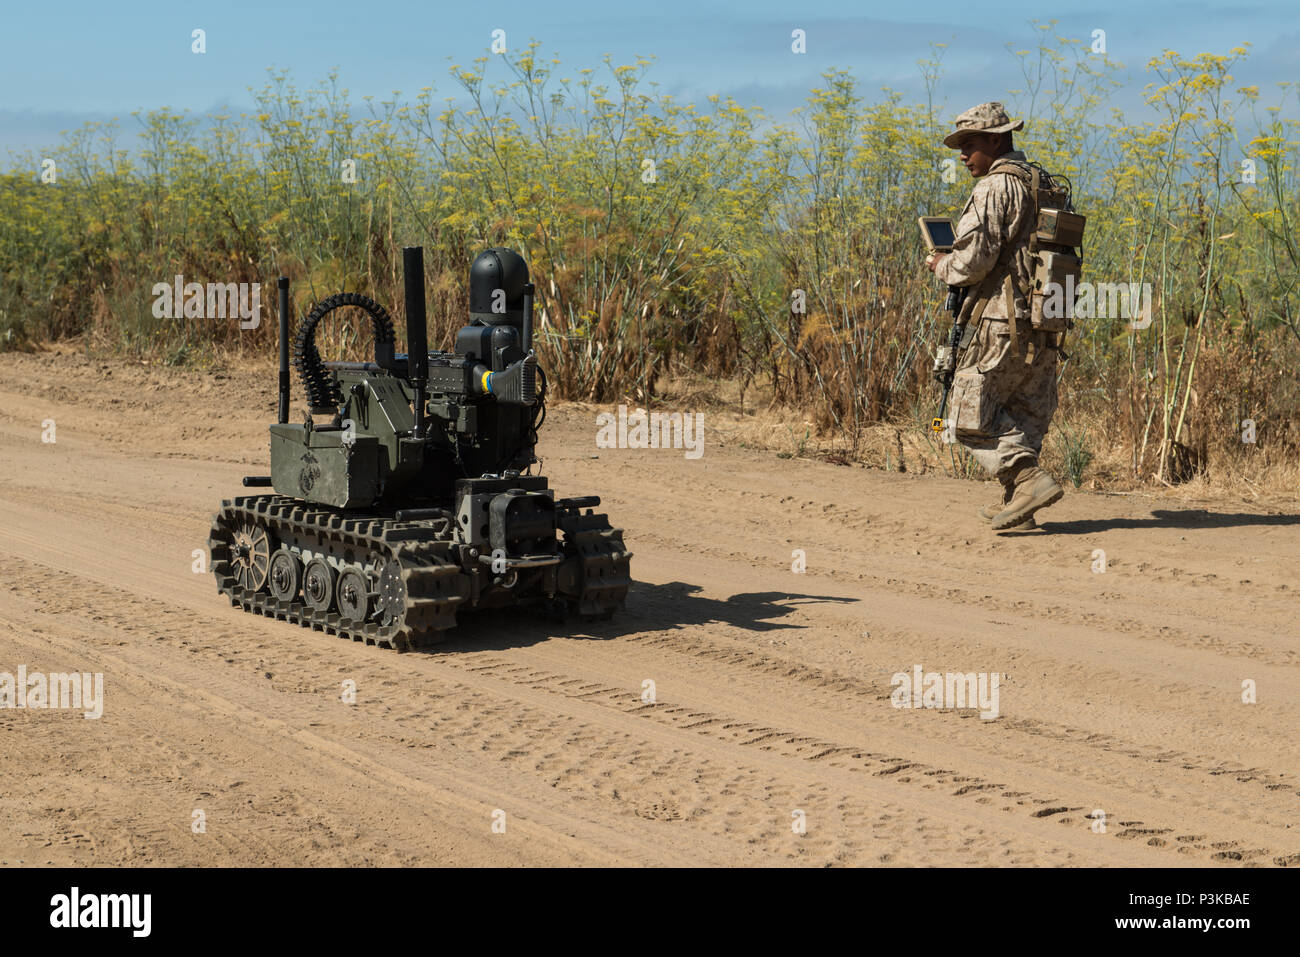 Pfc. Edgar Langle, an infantryman with 3rd Battalion, 5th Marine Regiment, operates a newly developed Modular Advanced Armed Robotic System in a field environment at Marine Corps Base Camp Pendleton, Calif., July 8, 2016.  The system was built by the Marine Corps Warfighting Laboratory to assist Marines in carrying gear and clearing buildings.  The lab is conducting a Marine Air-Ground Task Force Integrated Experiment in conjunction with Rim of the Pacific exercise to explore new gear and assess its capabilities for potential future use. The Warfighting Lab identifies possible challenges of th Stock Photo